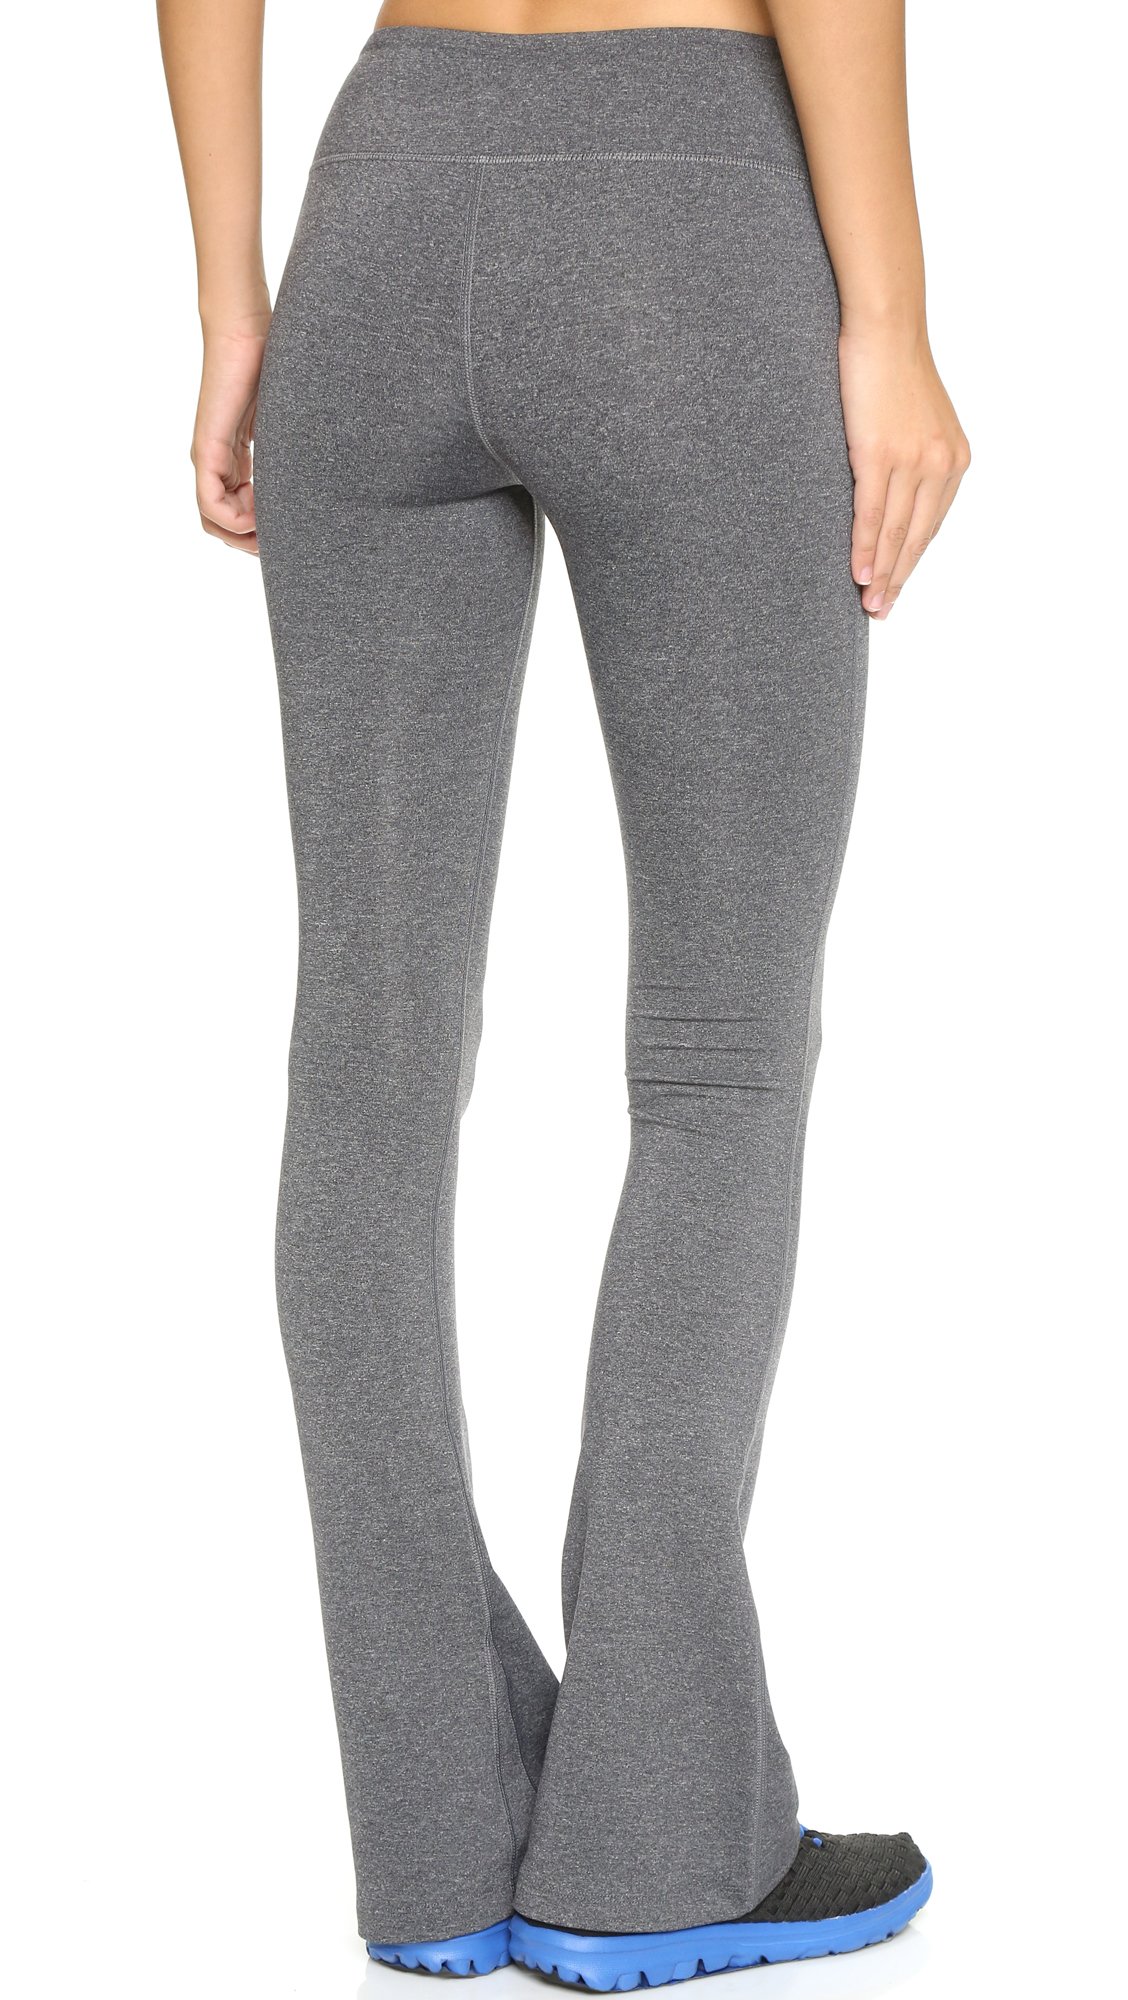 What To Wear With Grey Flare Leggings Women's